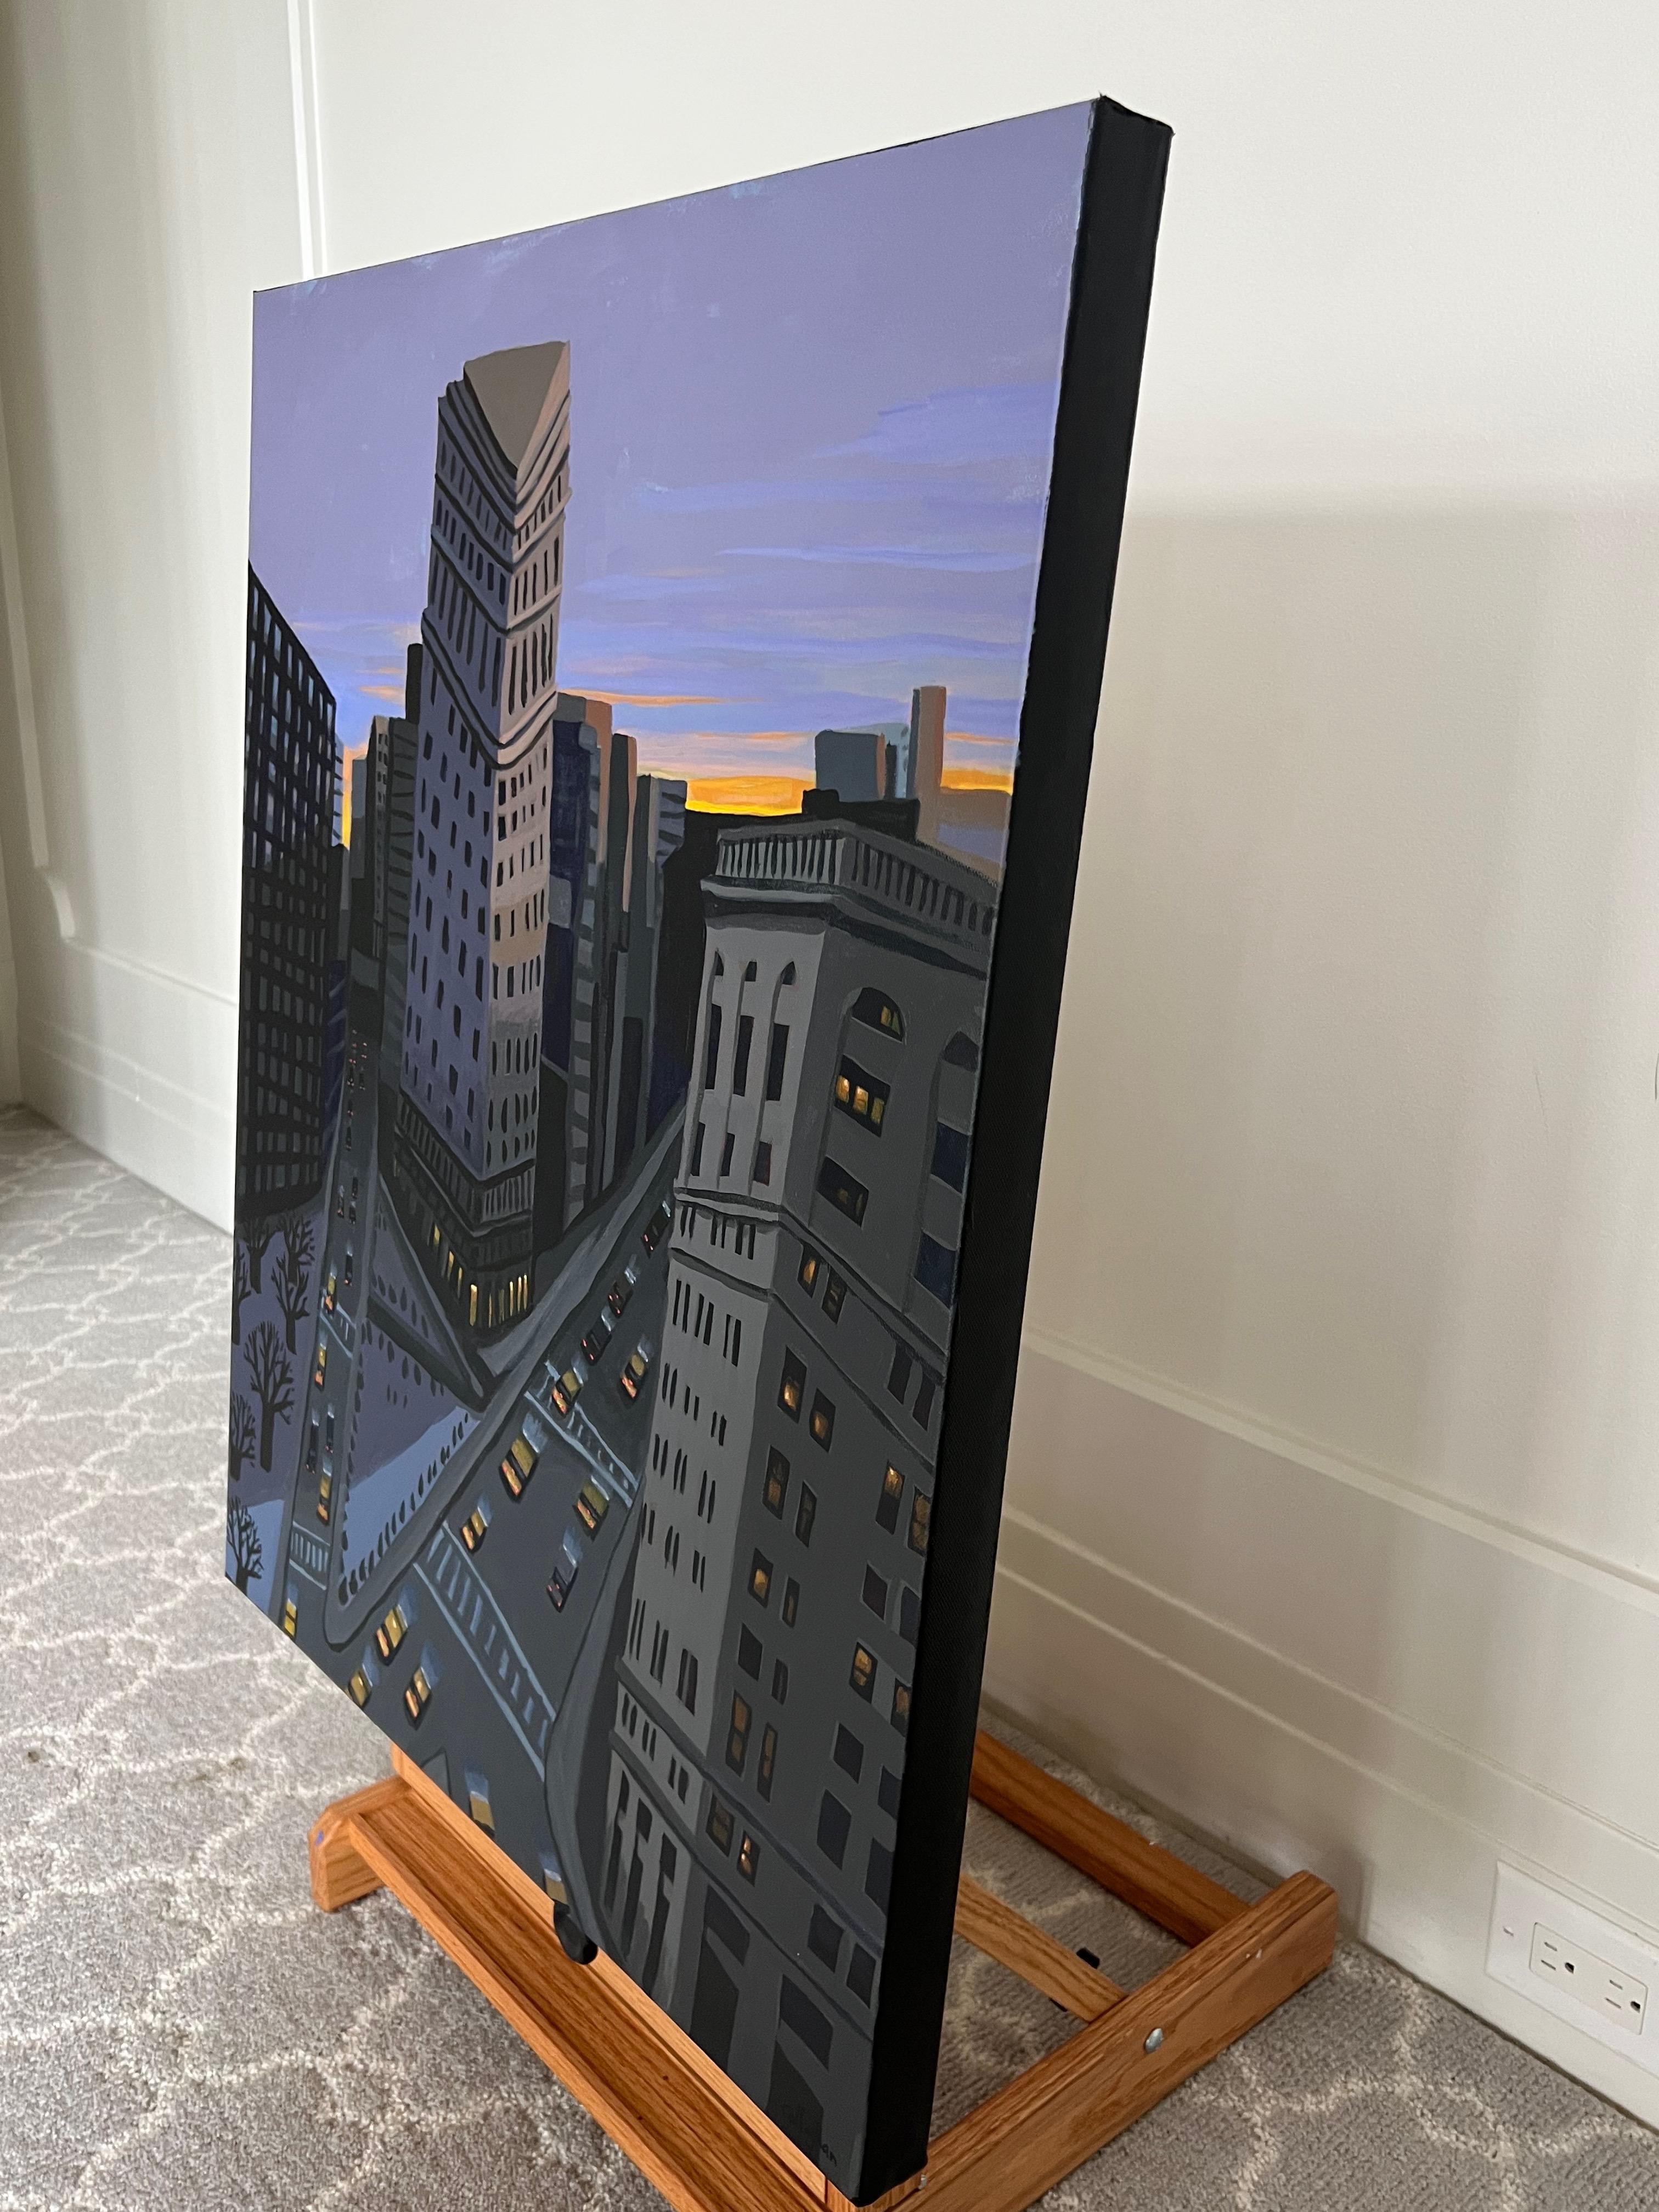 <p>Artist Comments<br>Artist Brian Callaghan presents the distinctive view of the Flat Iron Building near Madison Park. The vibrant yellow tones from taxis, the sky, and indoor lights pop against the surrounding gray structures. Brian employs skewed